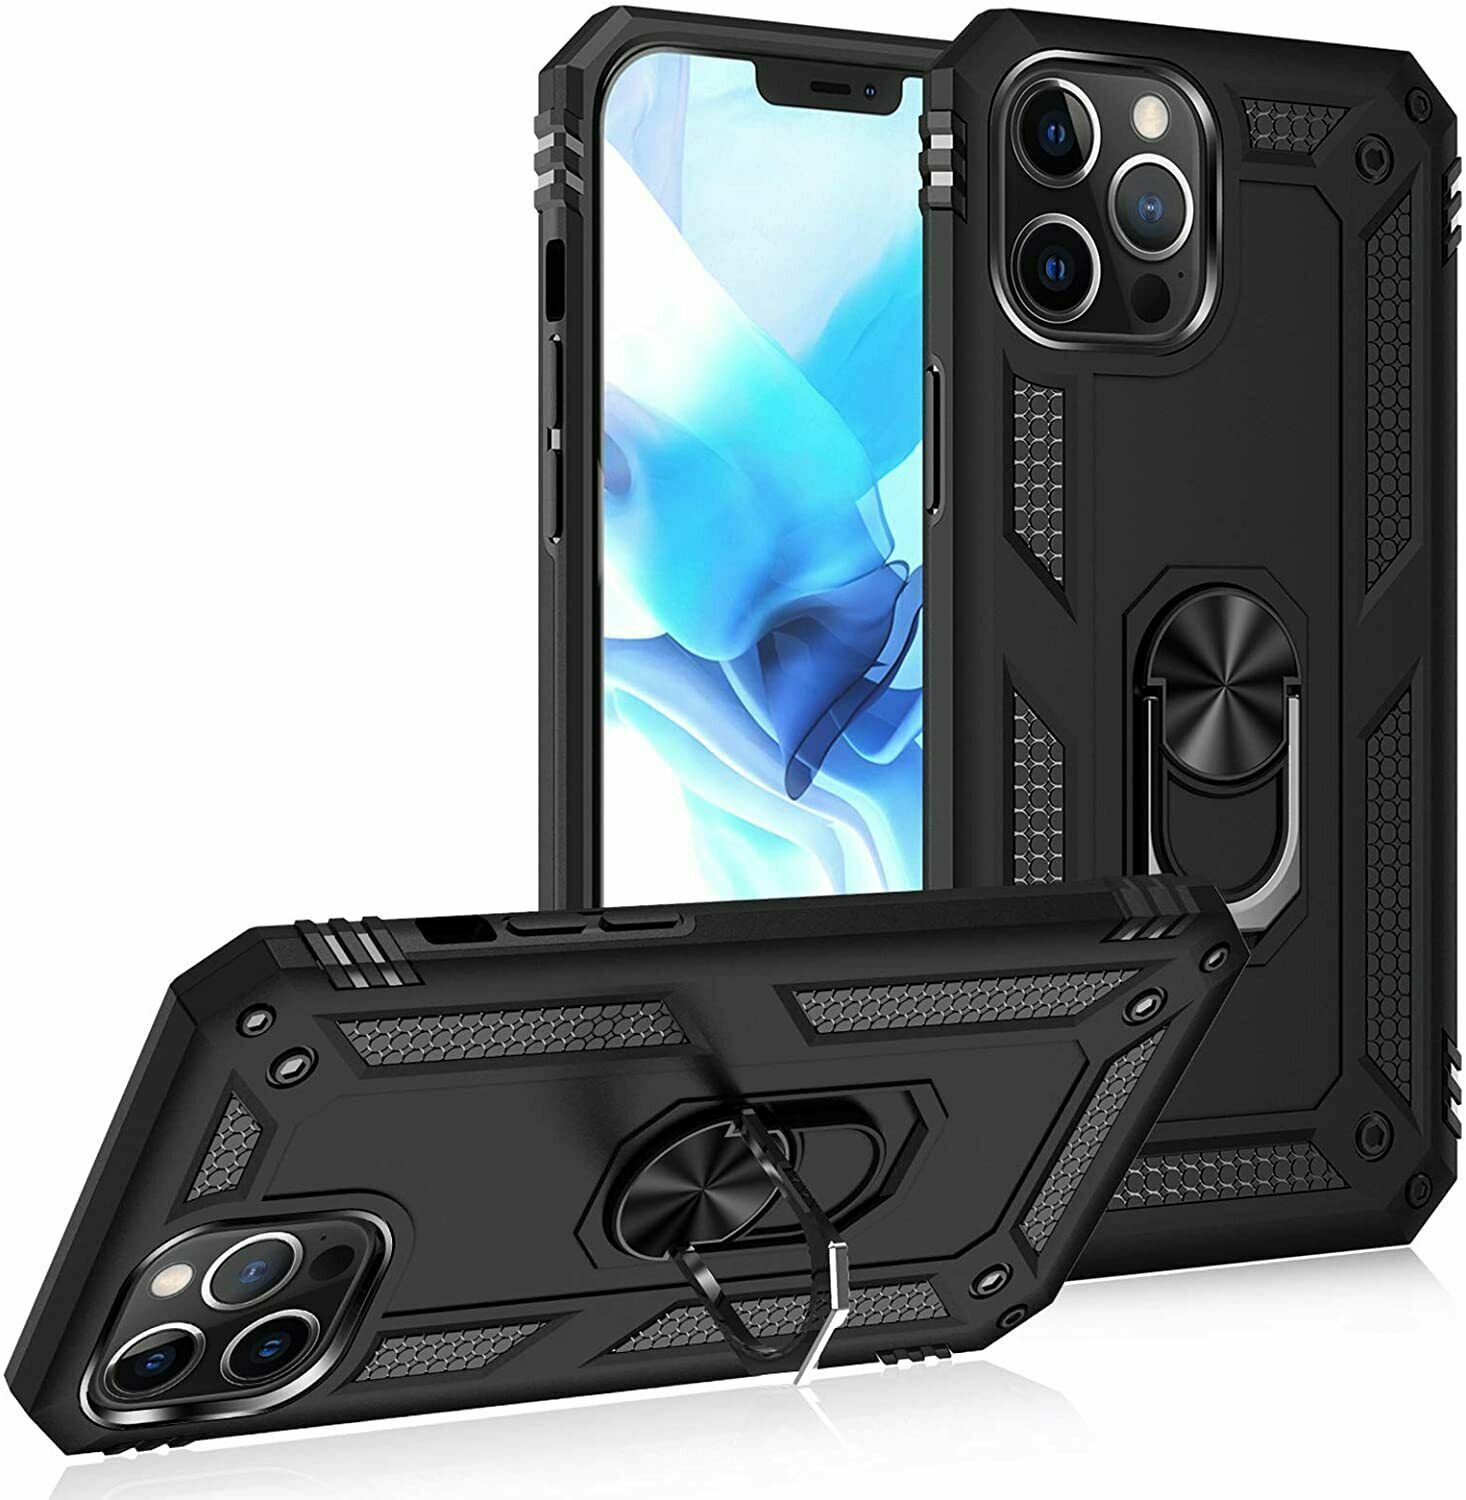 Shockproof Dual Layer Armor Phone Case Cover For Apple iPhone 12 12 Mini 12 Pro 